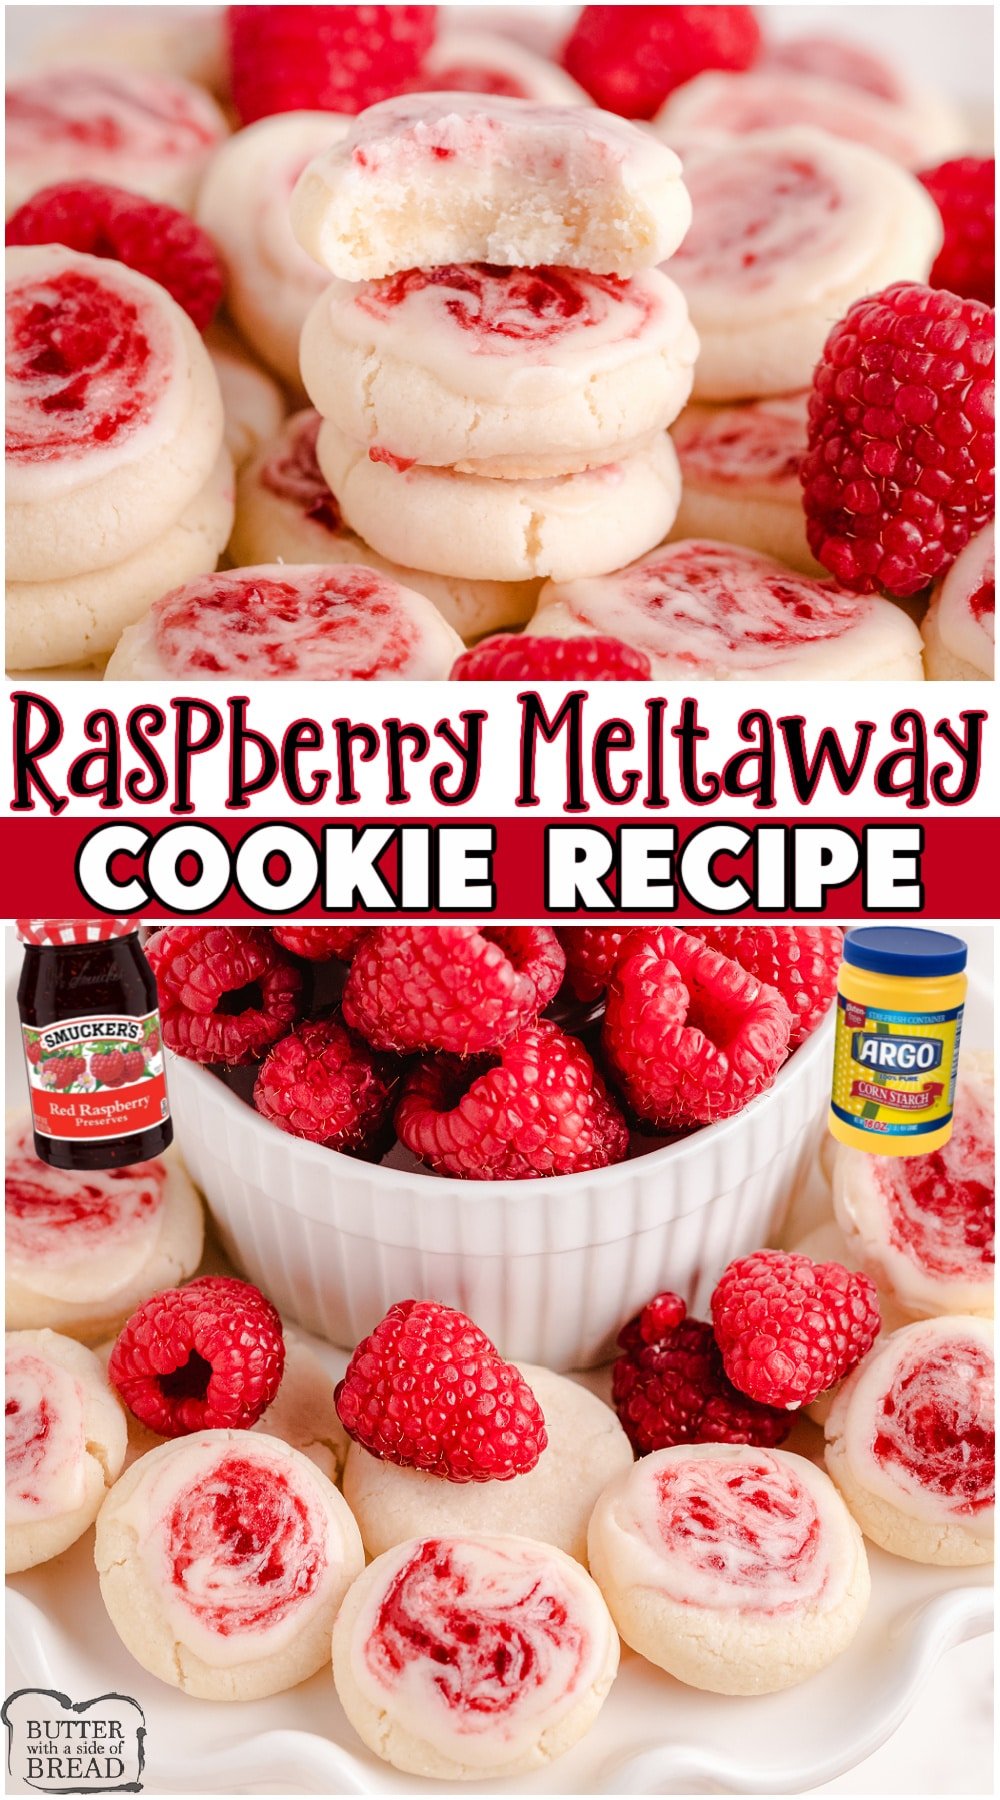 Raspberry Meltaway Cookies are soft & delicate & truly melt in your mouth! Perfect vanilla cookies topped with a sweet glaze swirled with raspberry jam. #cookies #raspberry #meltaways #baking #dessert #easyrecipe from BUTTER WITH A SIDE OF BREAD